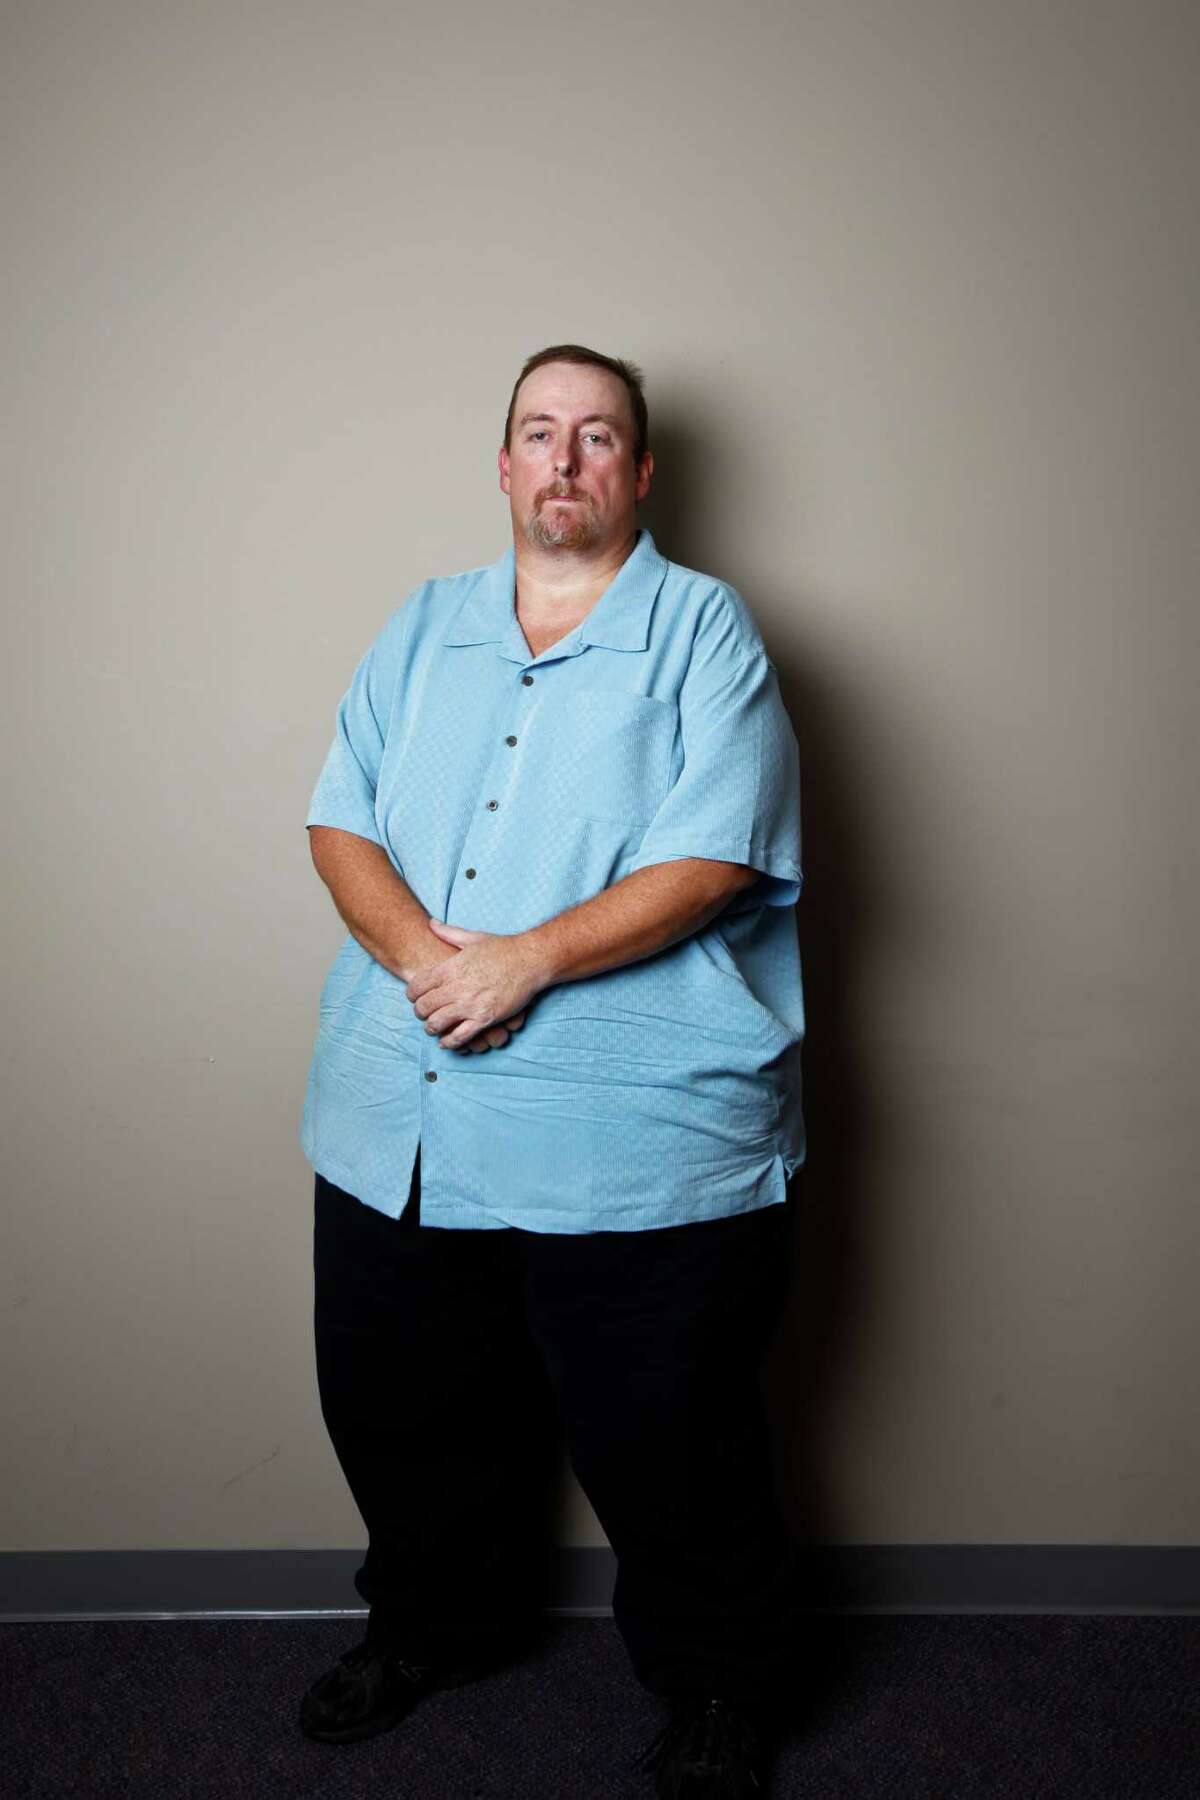 Ronald Kratz II was fired from his job because his employees said he was morbidly obese with a weight of 600 pounds. The EEOC has sued BAE Systems on his behalf under the Americans with Disabilities Act. Wednesday, Sept. 28, 2011, in Houston. ( Michael Paulsen / Houston Chronicle )